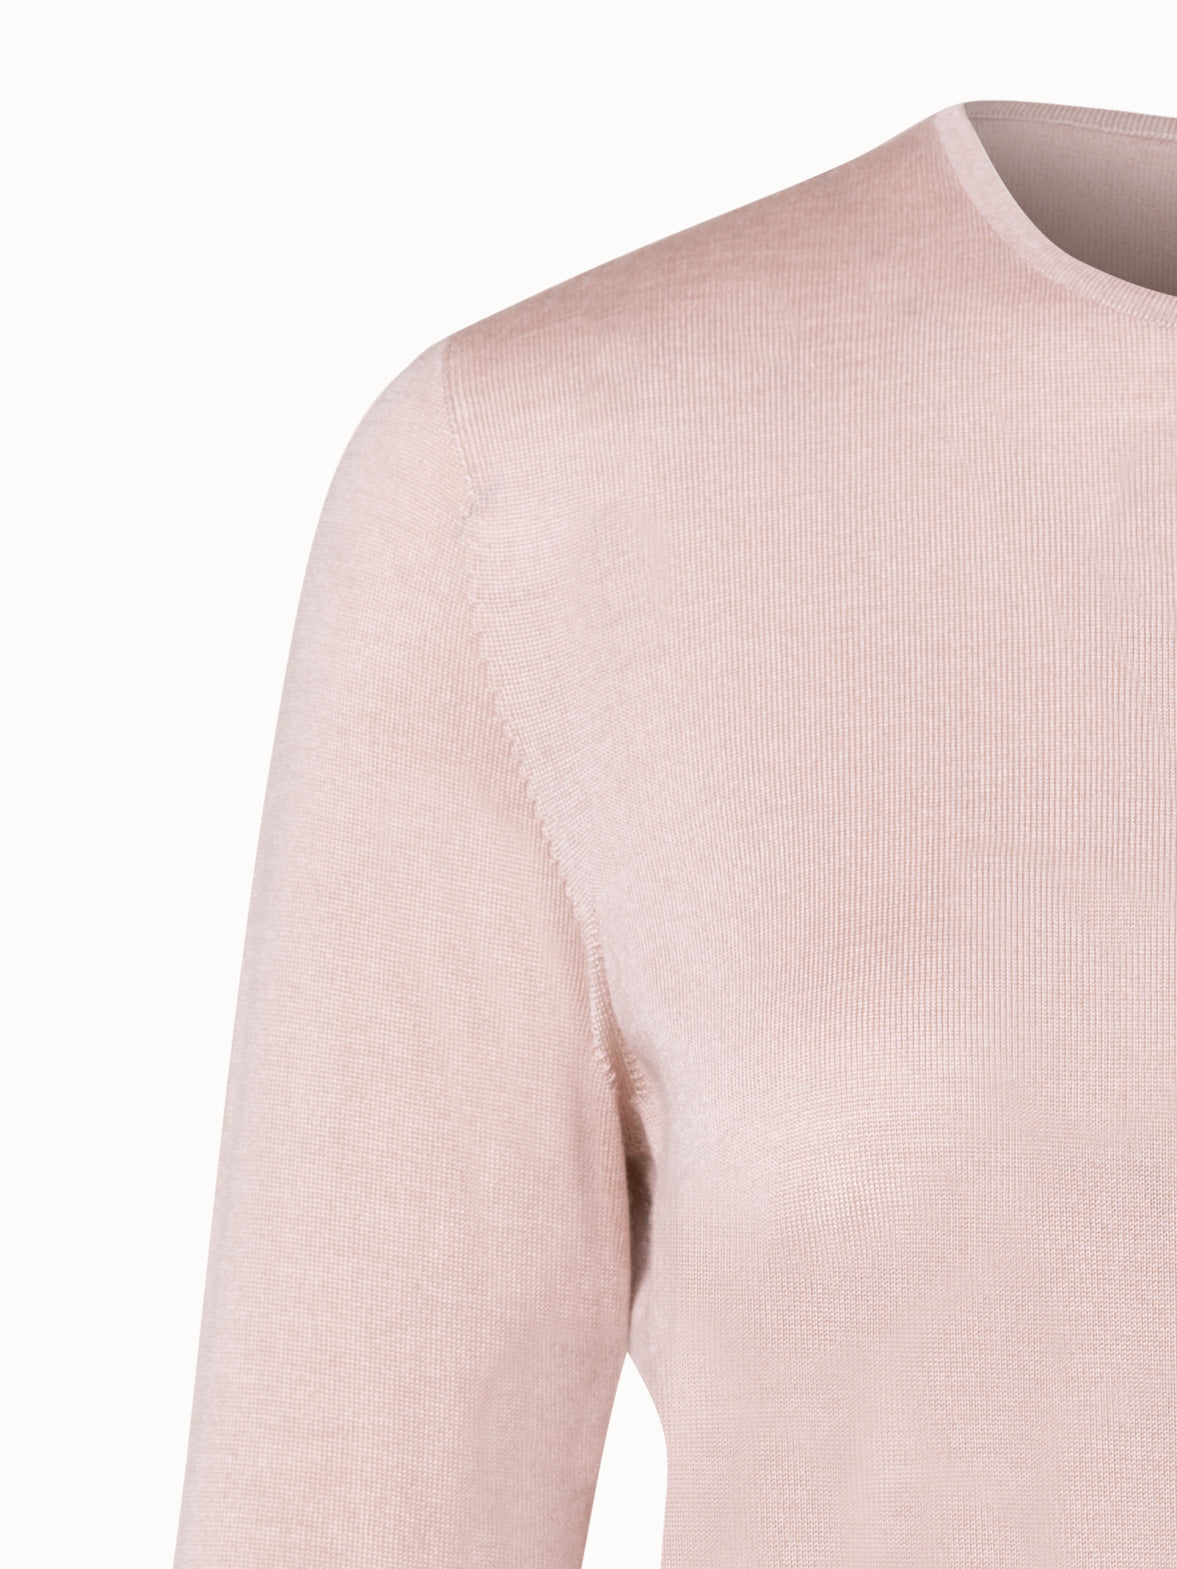 Women's Silk Cashmere Light Knits - all products